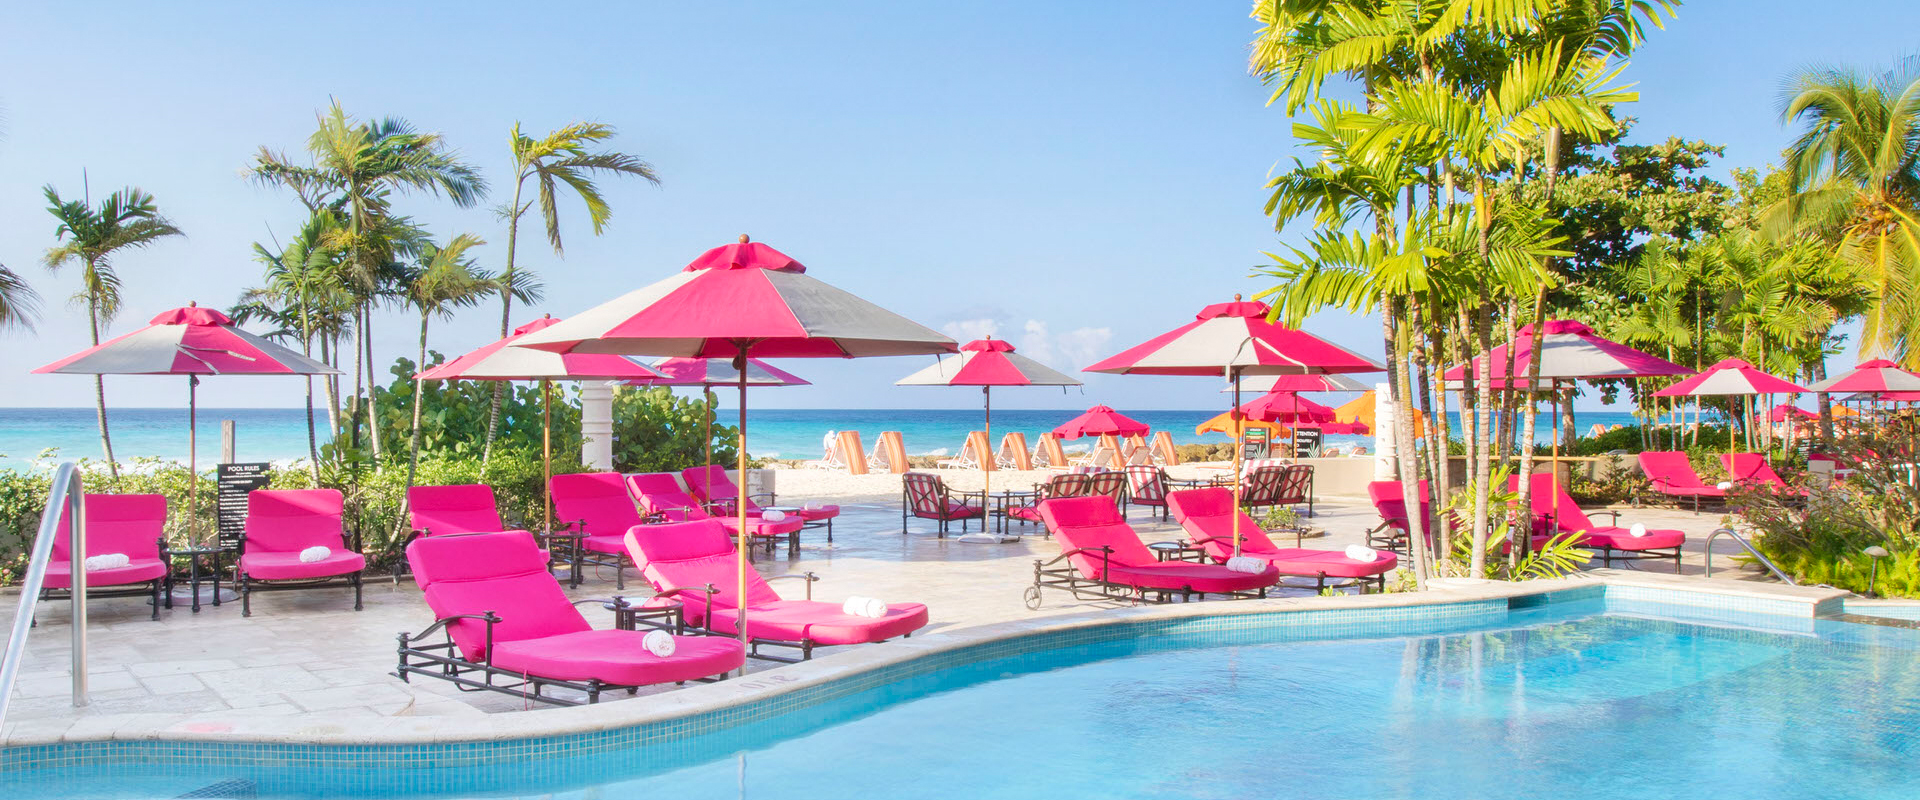 pink sun umbrellas and pool chairs around a pool 